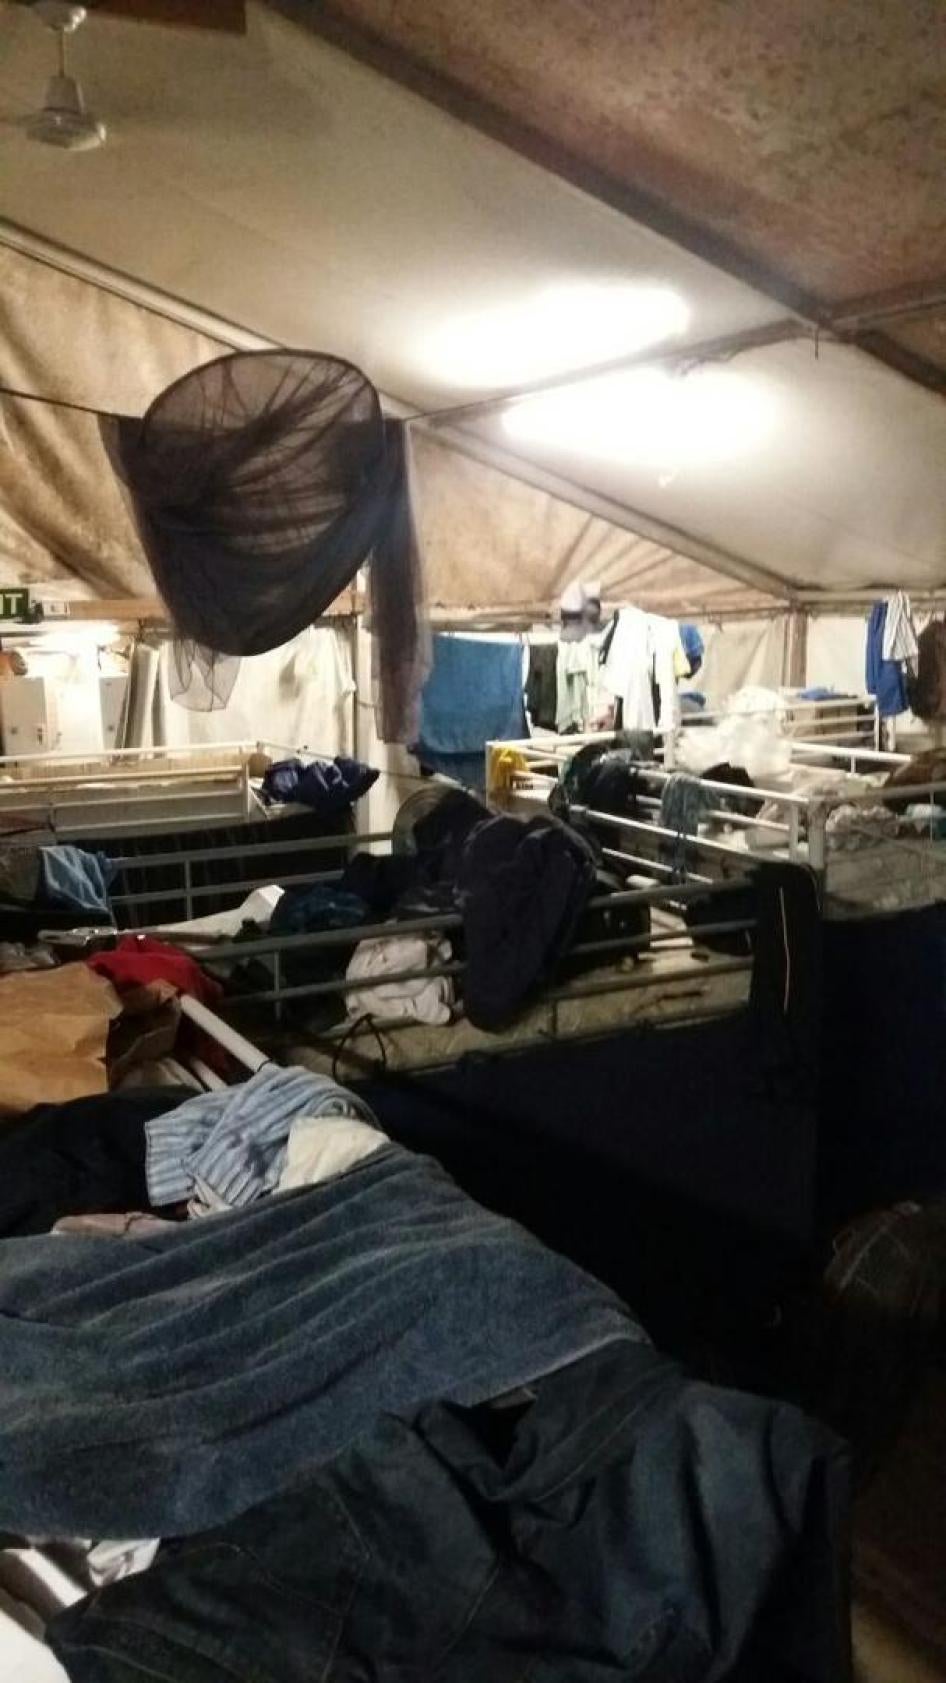 Over 400 asylum seekers and refugees remain in cramped tents in Australia’s Refugee Processing Center on Nauru. Temperatures in the tents regularly reach 45 to 50 degrees Celsius (113 to 122 degrees Fahrenheit). 